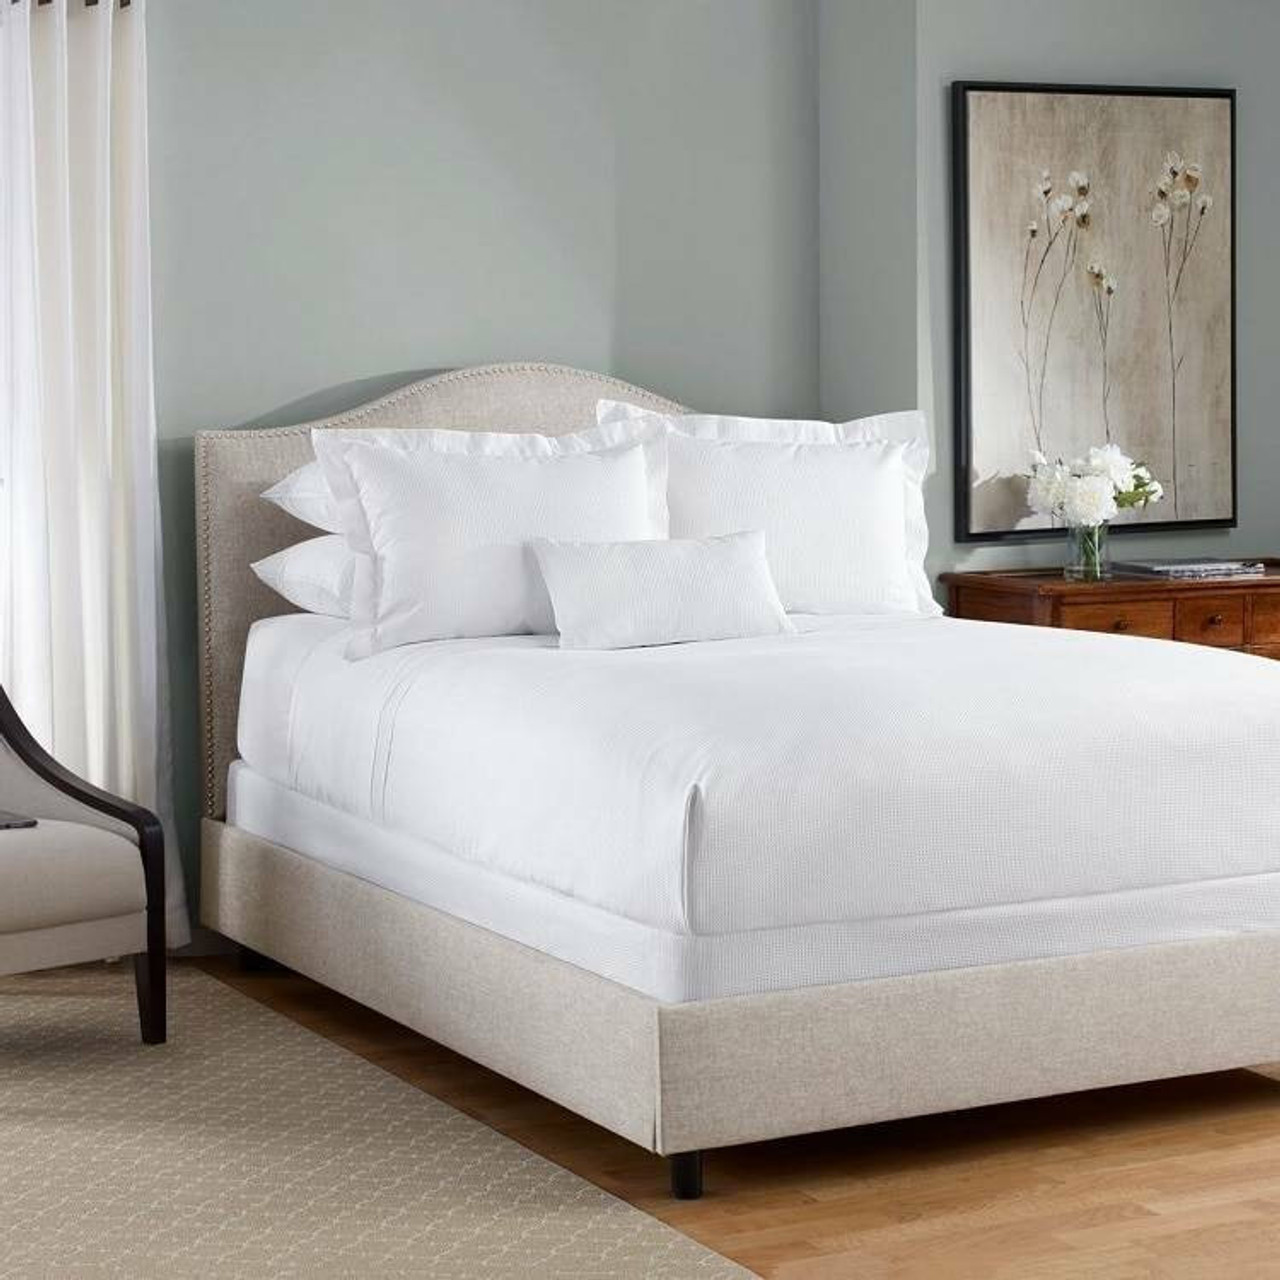 6 new white flat sheet king  108x110 300 thread count parcale hotel 1888 mills 